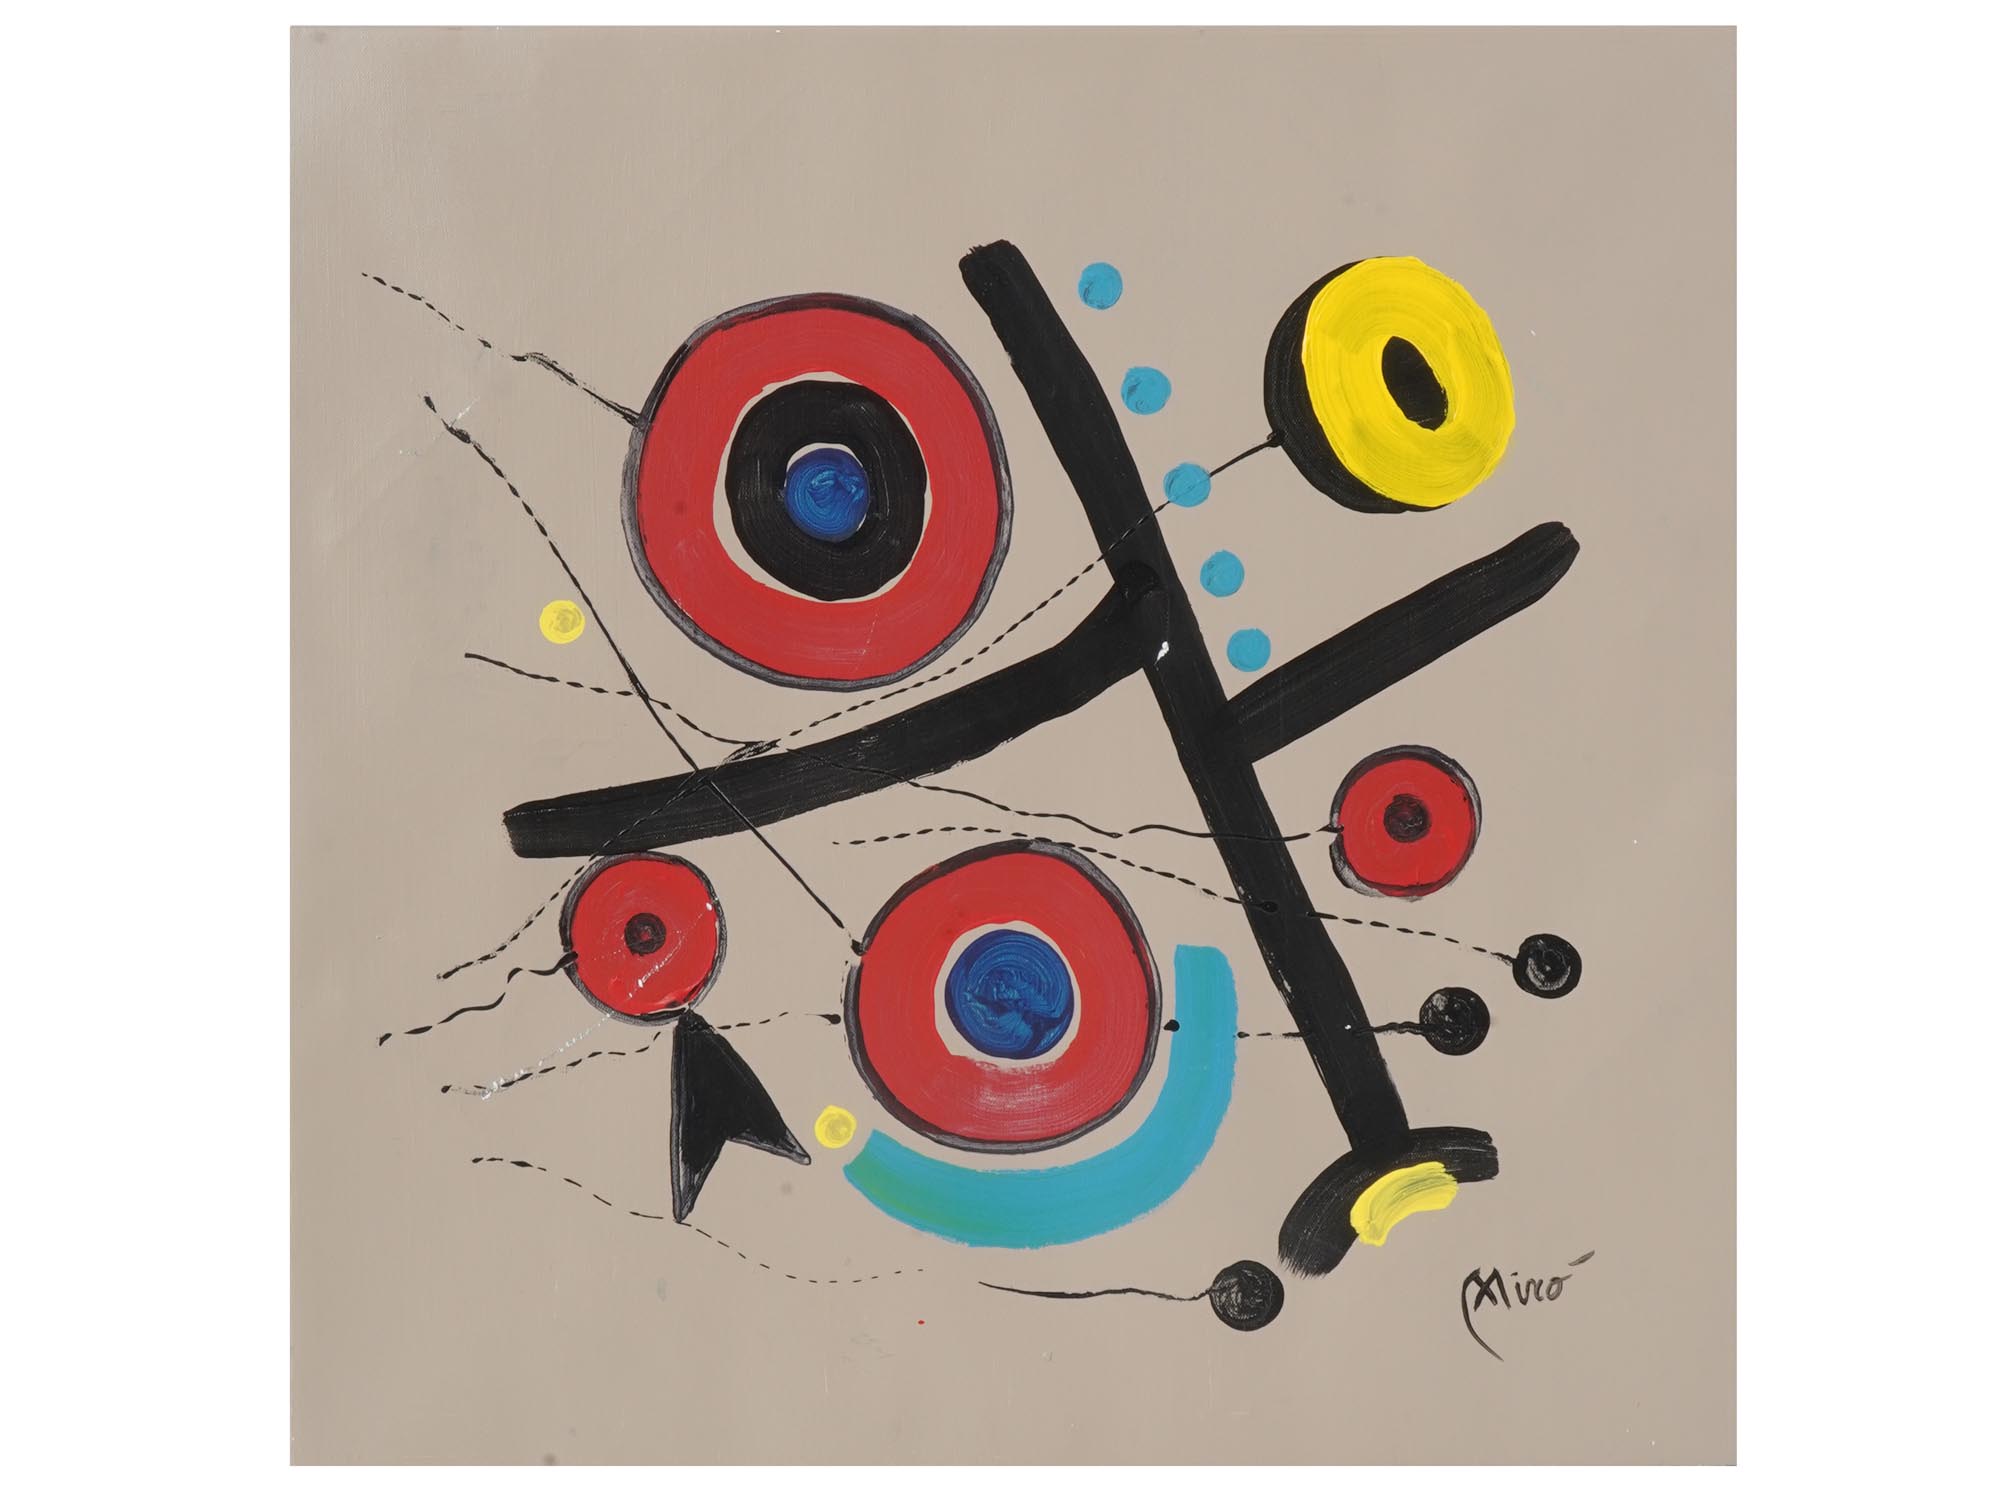 ATTRIBUTED TO JOAN MIRO ABSTRACT OIL PAINTING PIC-0